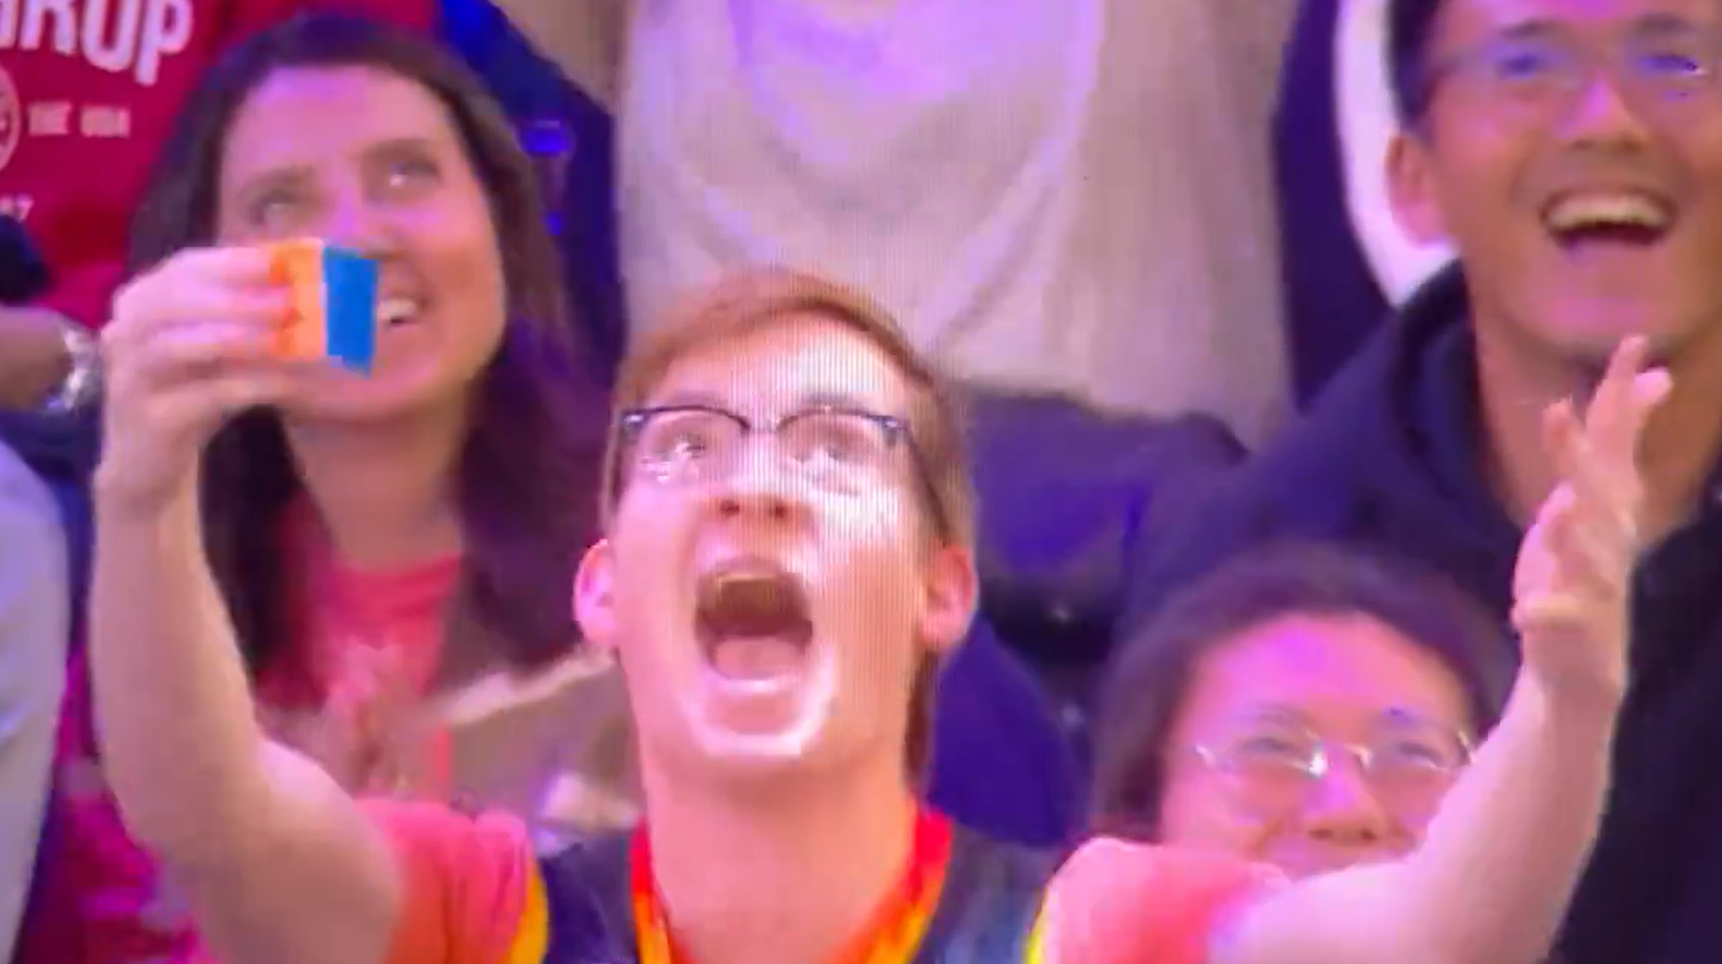 A Suns fan got the crowd into it after he solved a Rubik's Cube on the jumbotron at Footprint Cente...